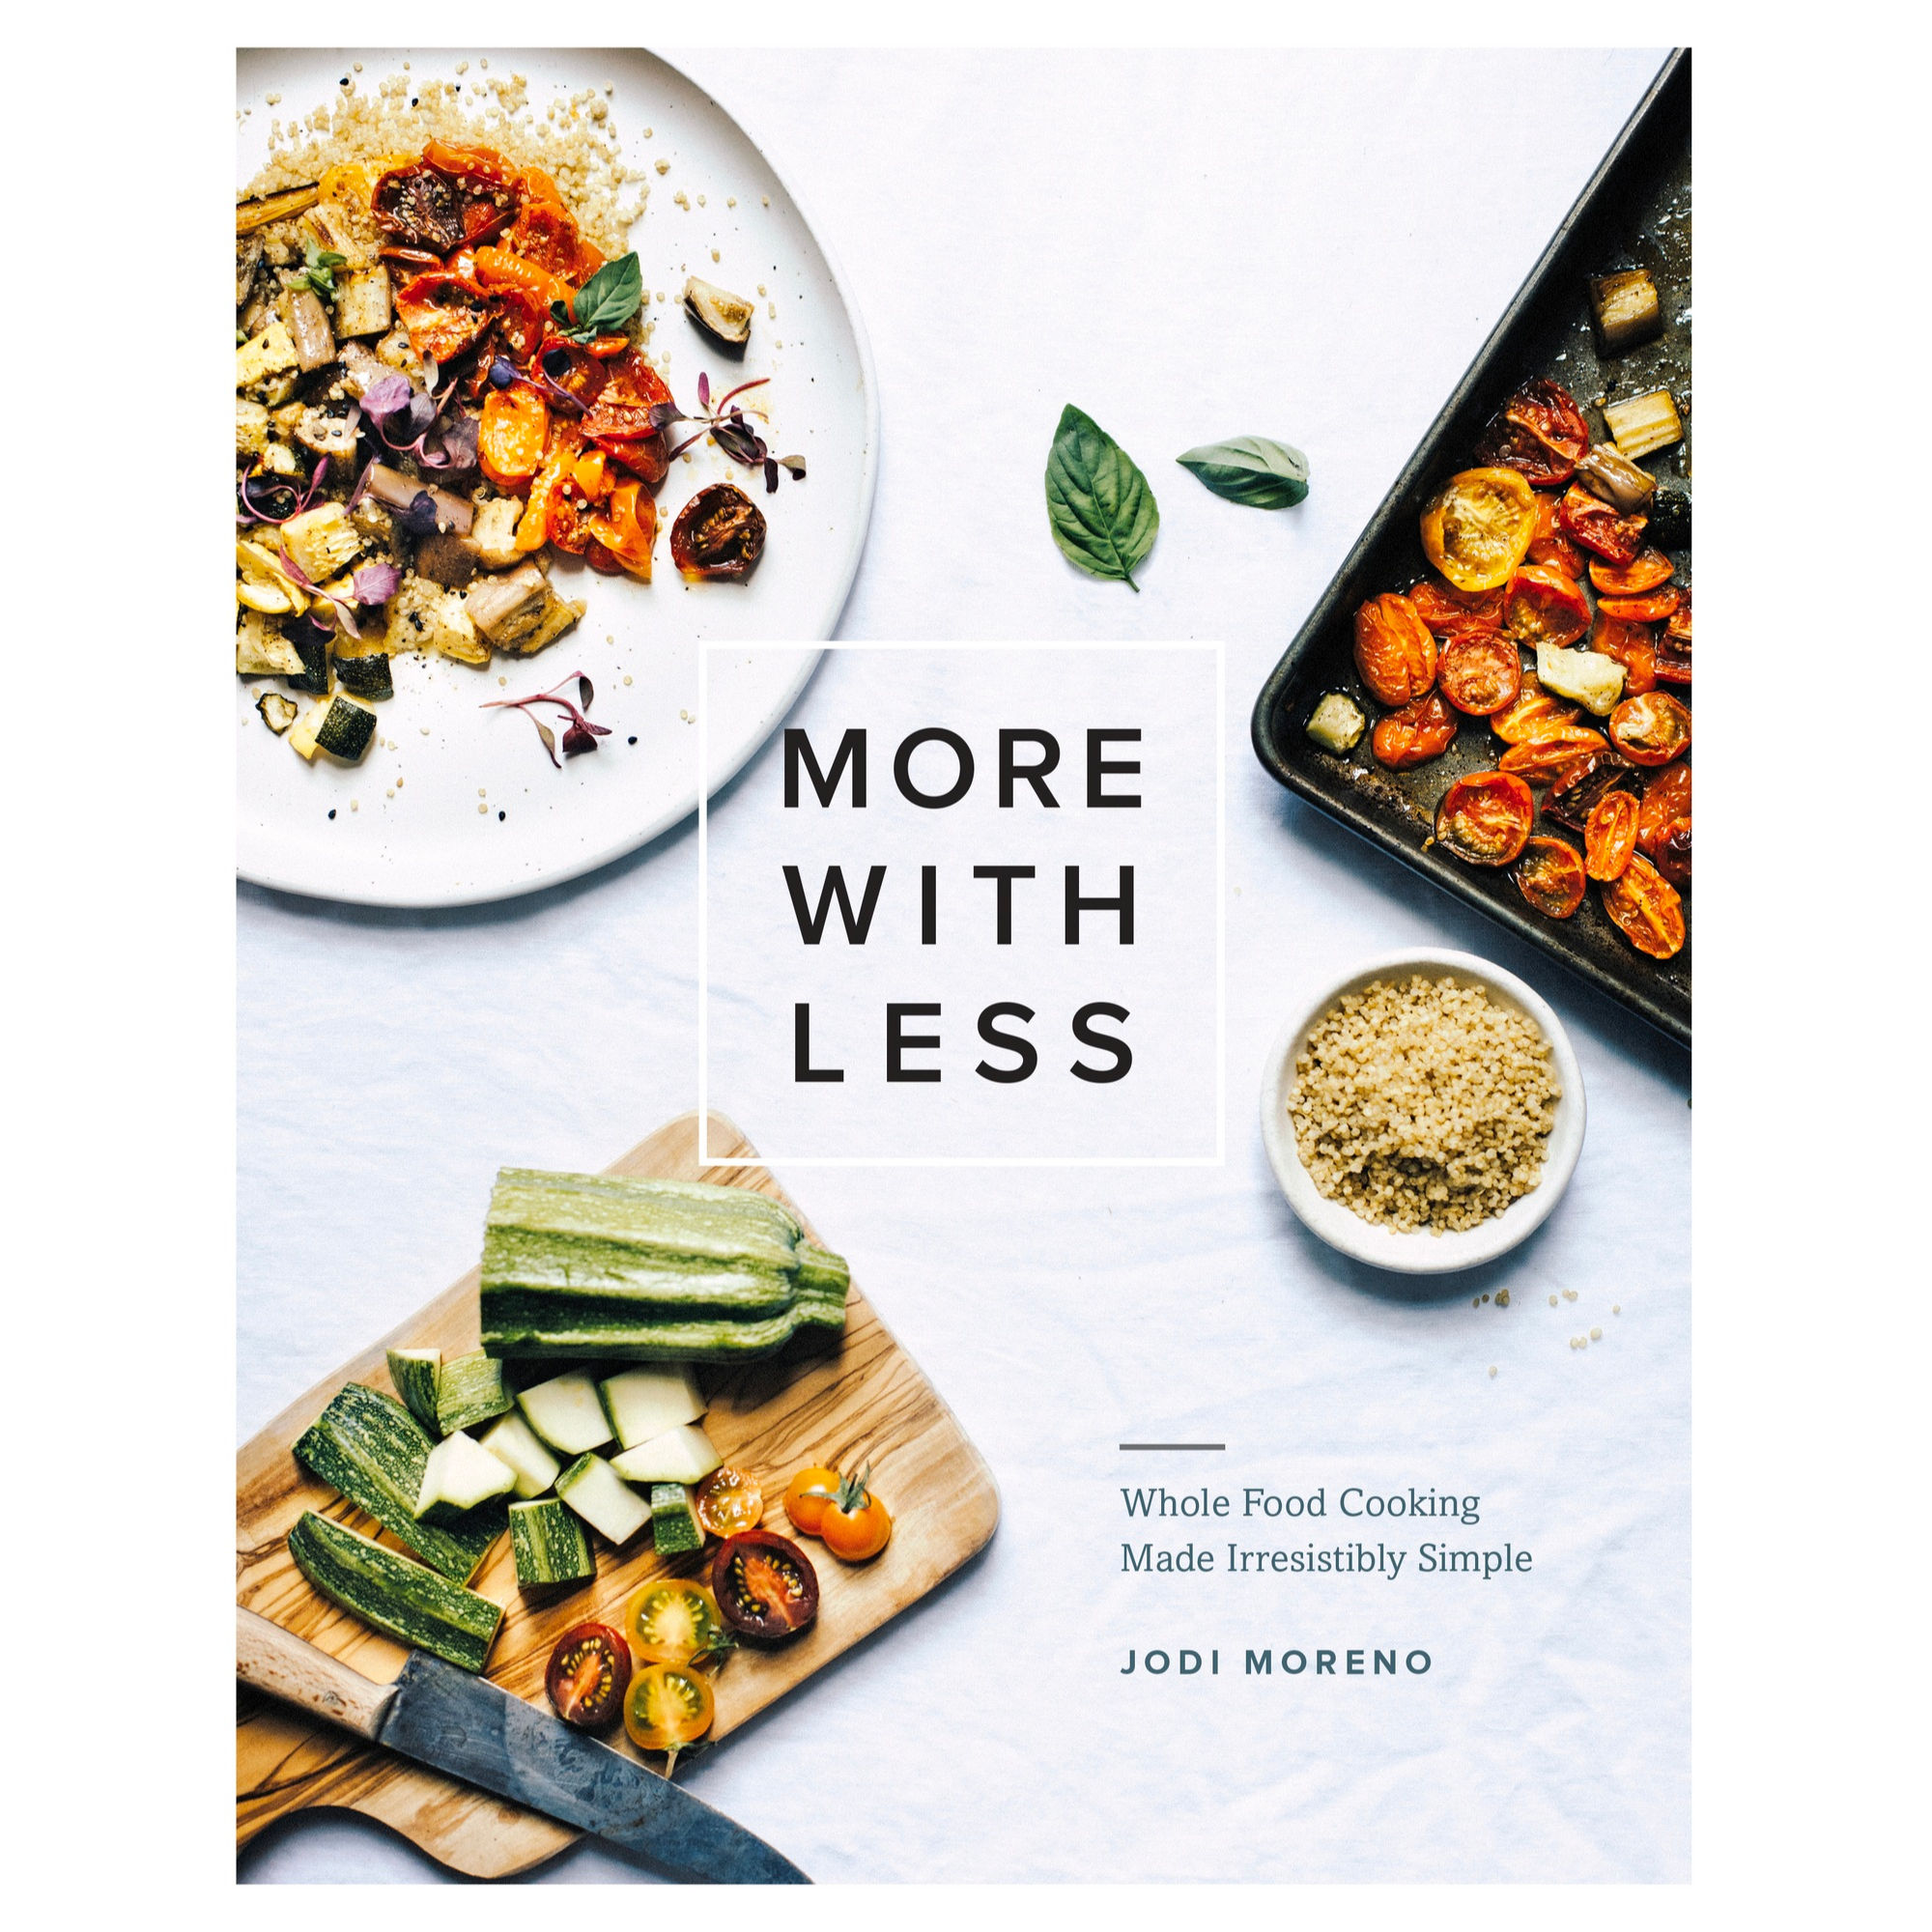 More With Less Cookbook